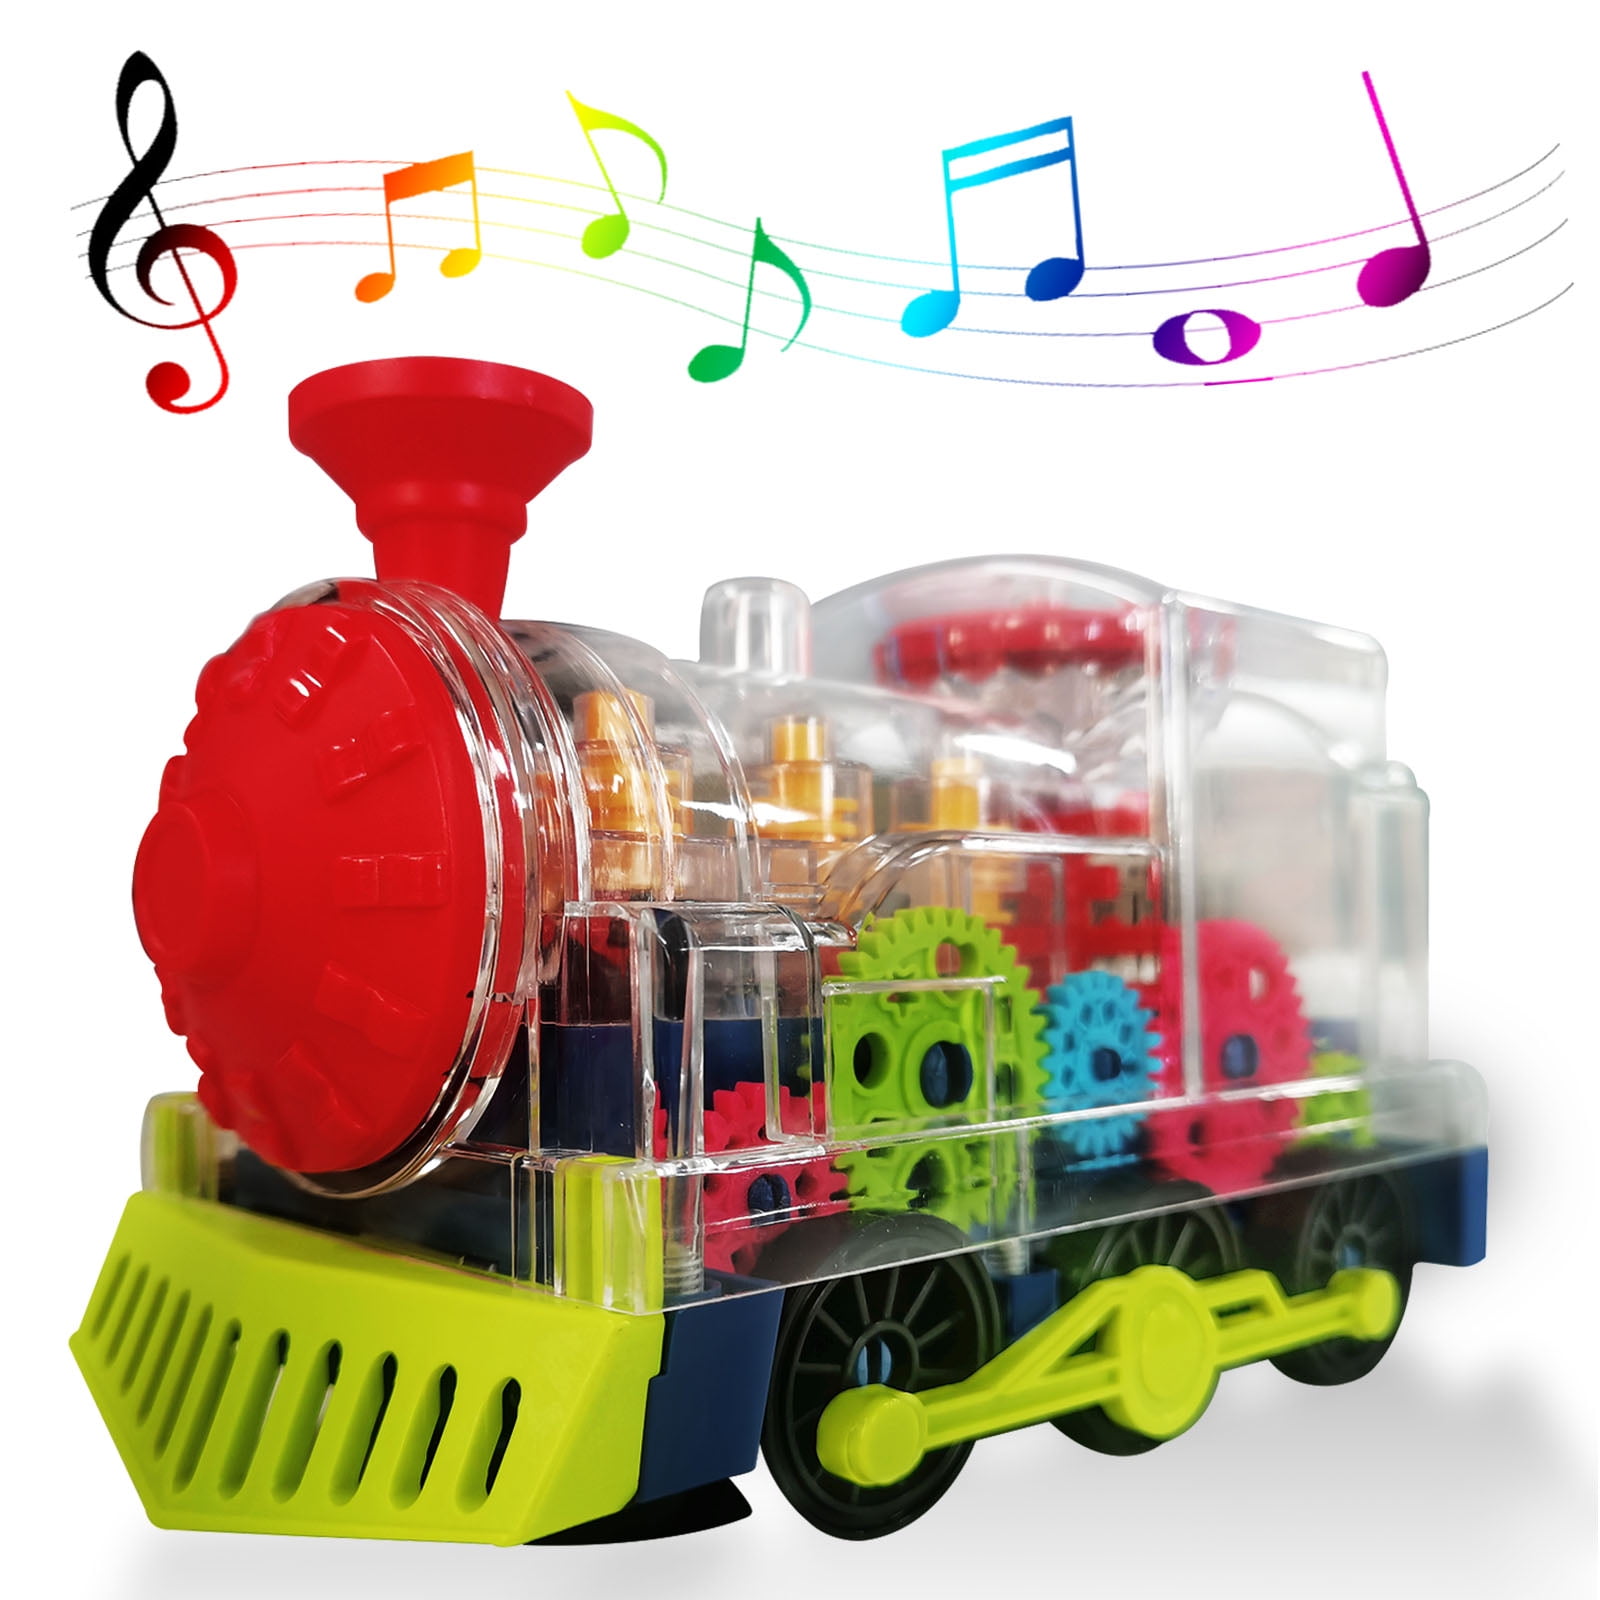 Gear Toy Train,Early Educational Transparent Light Up Baby Music Train Toy,Children Electric Universal Rotating Mechanical Gear Train Cartoon Flashing Light Sound Music Train Toy for Boy Kids Child. 